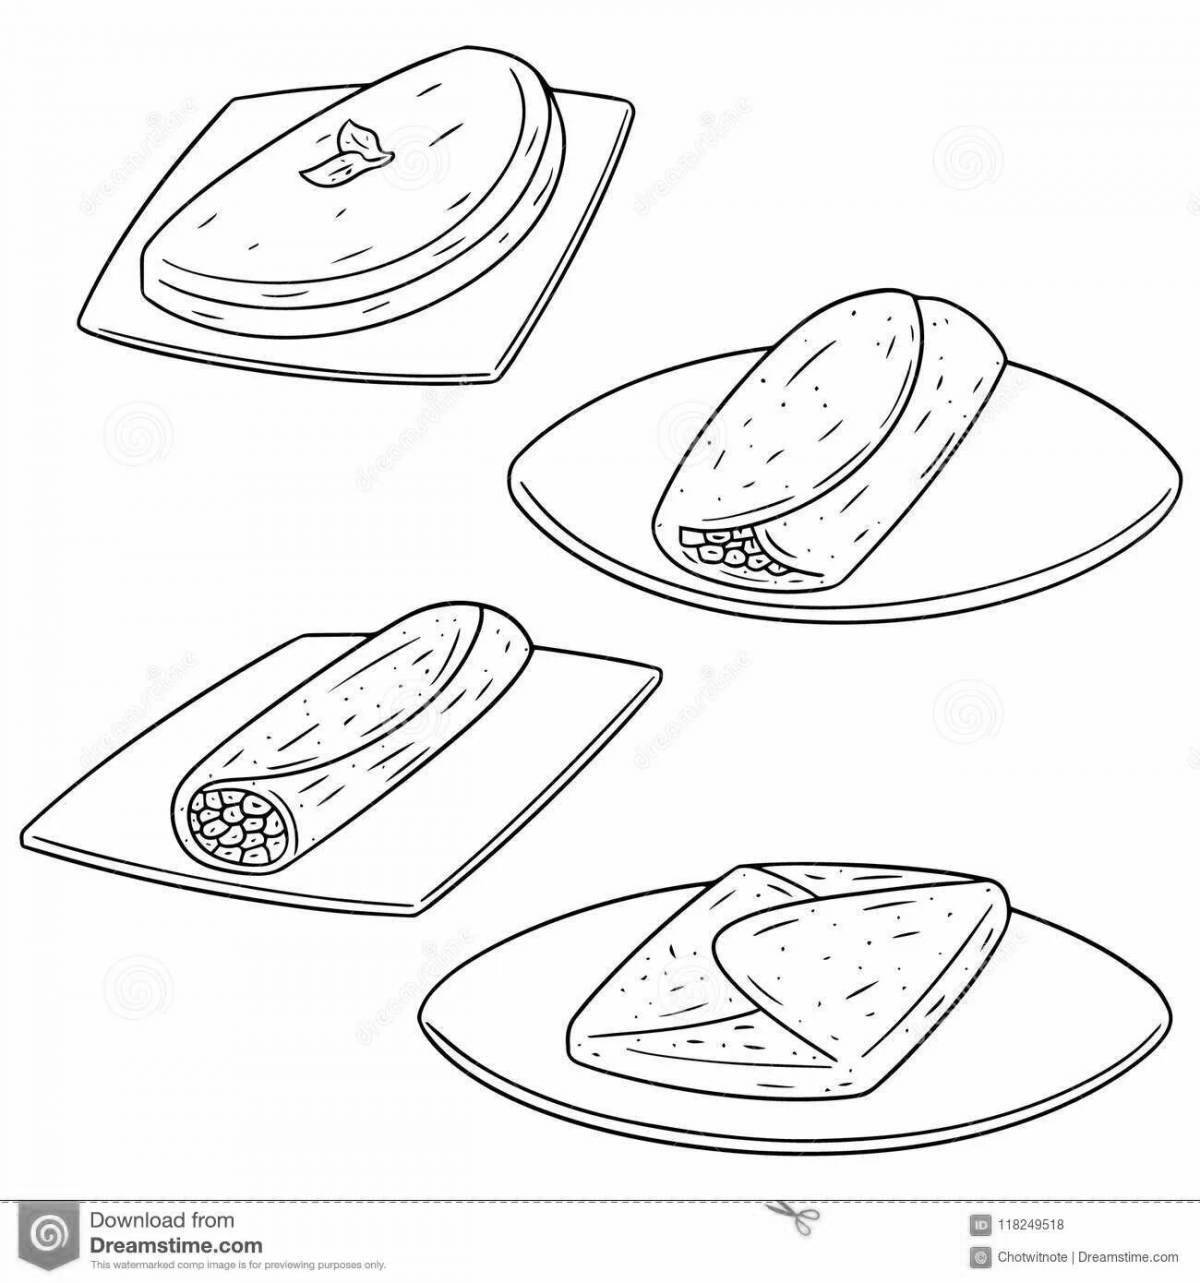 Playful omelet coloring page